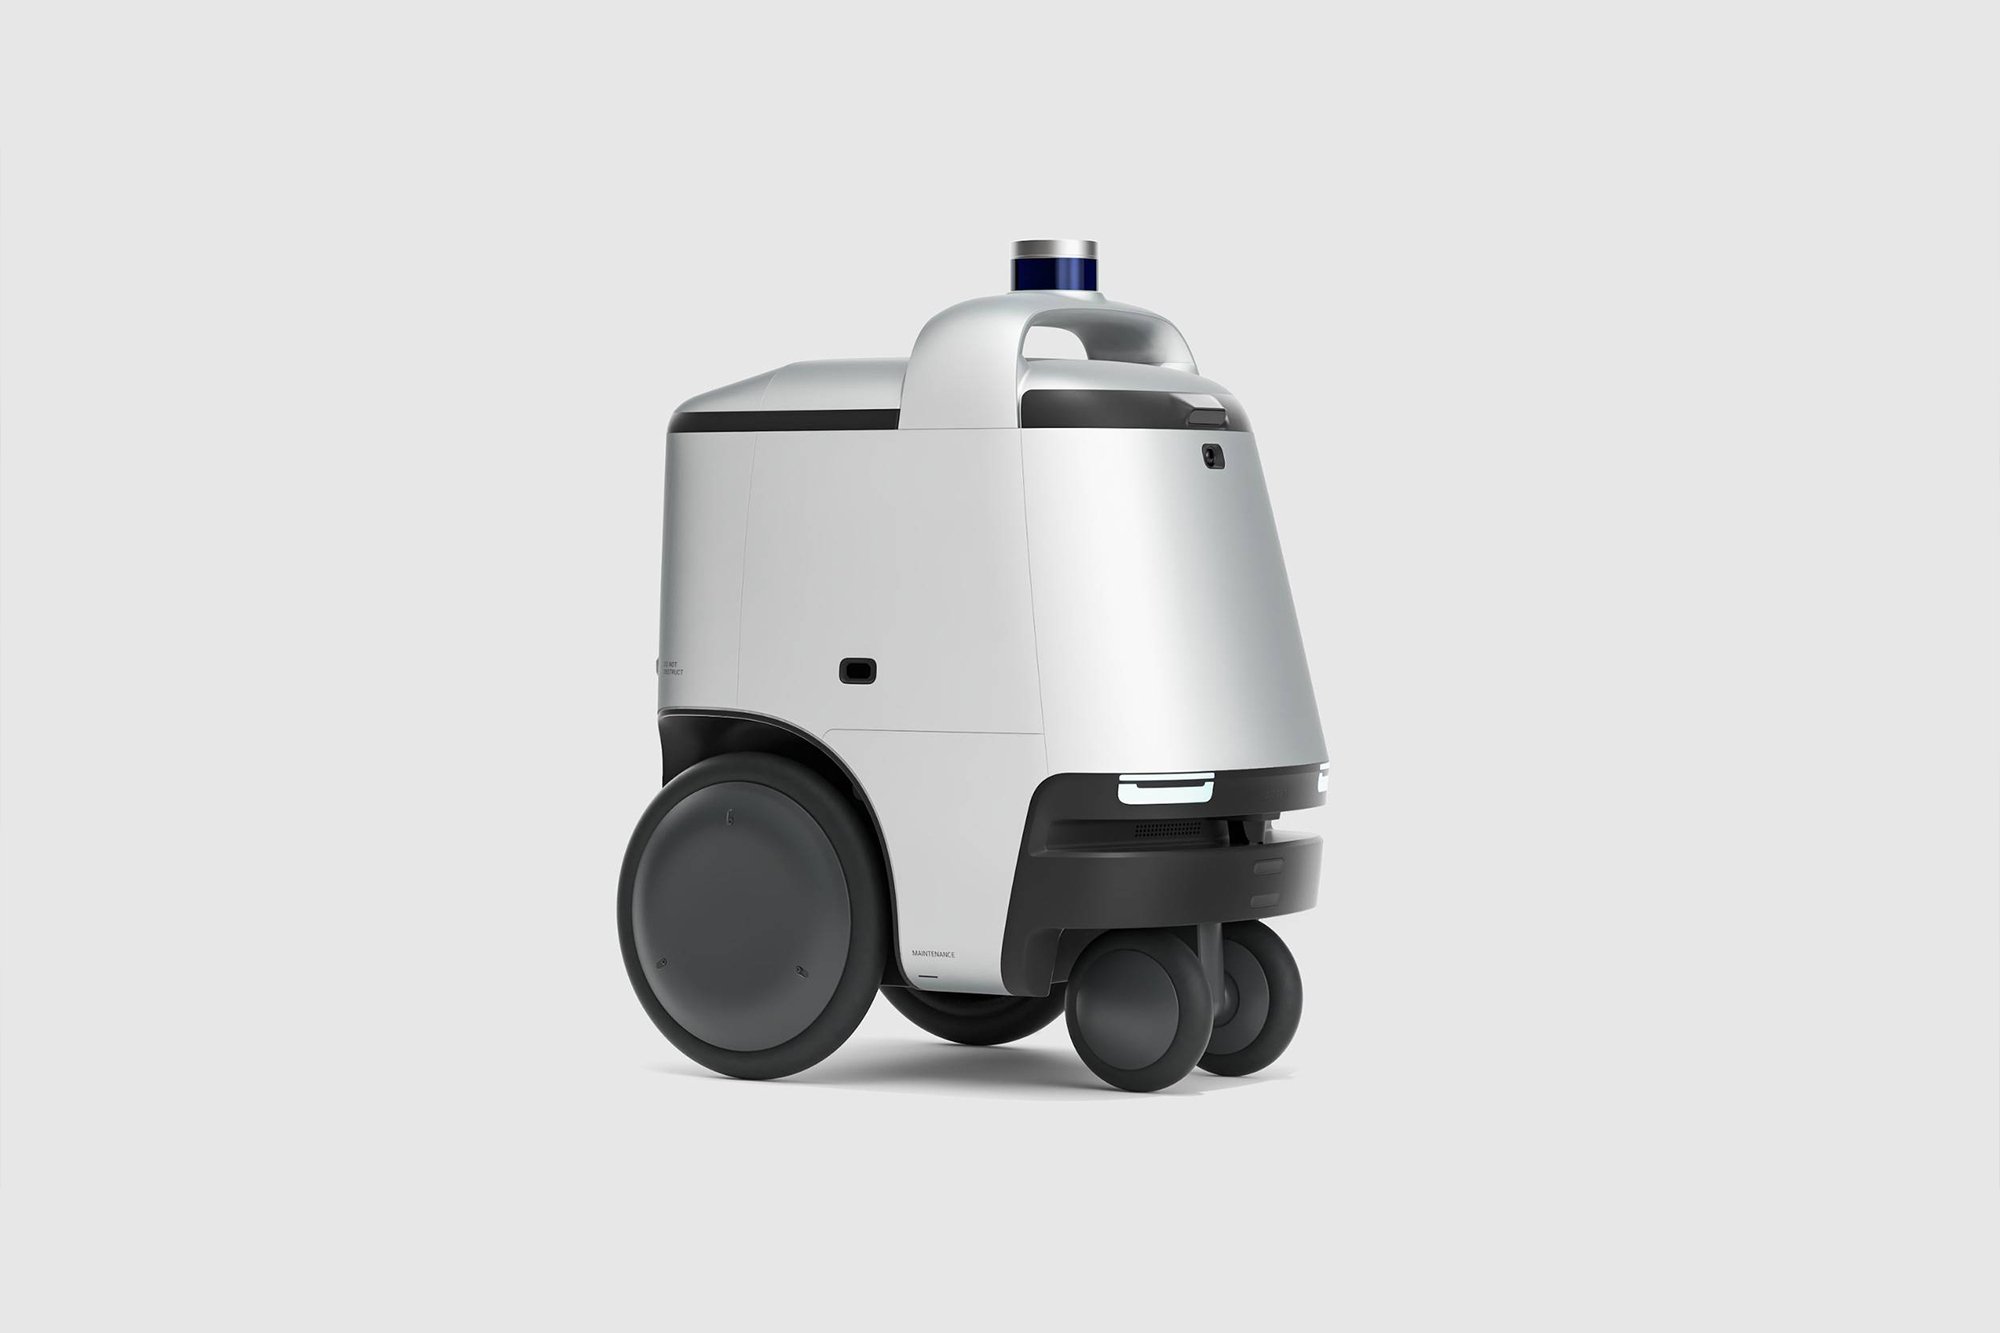 The future of autonomous delivery with CITIZEN Robot by LeapX